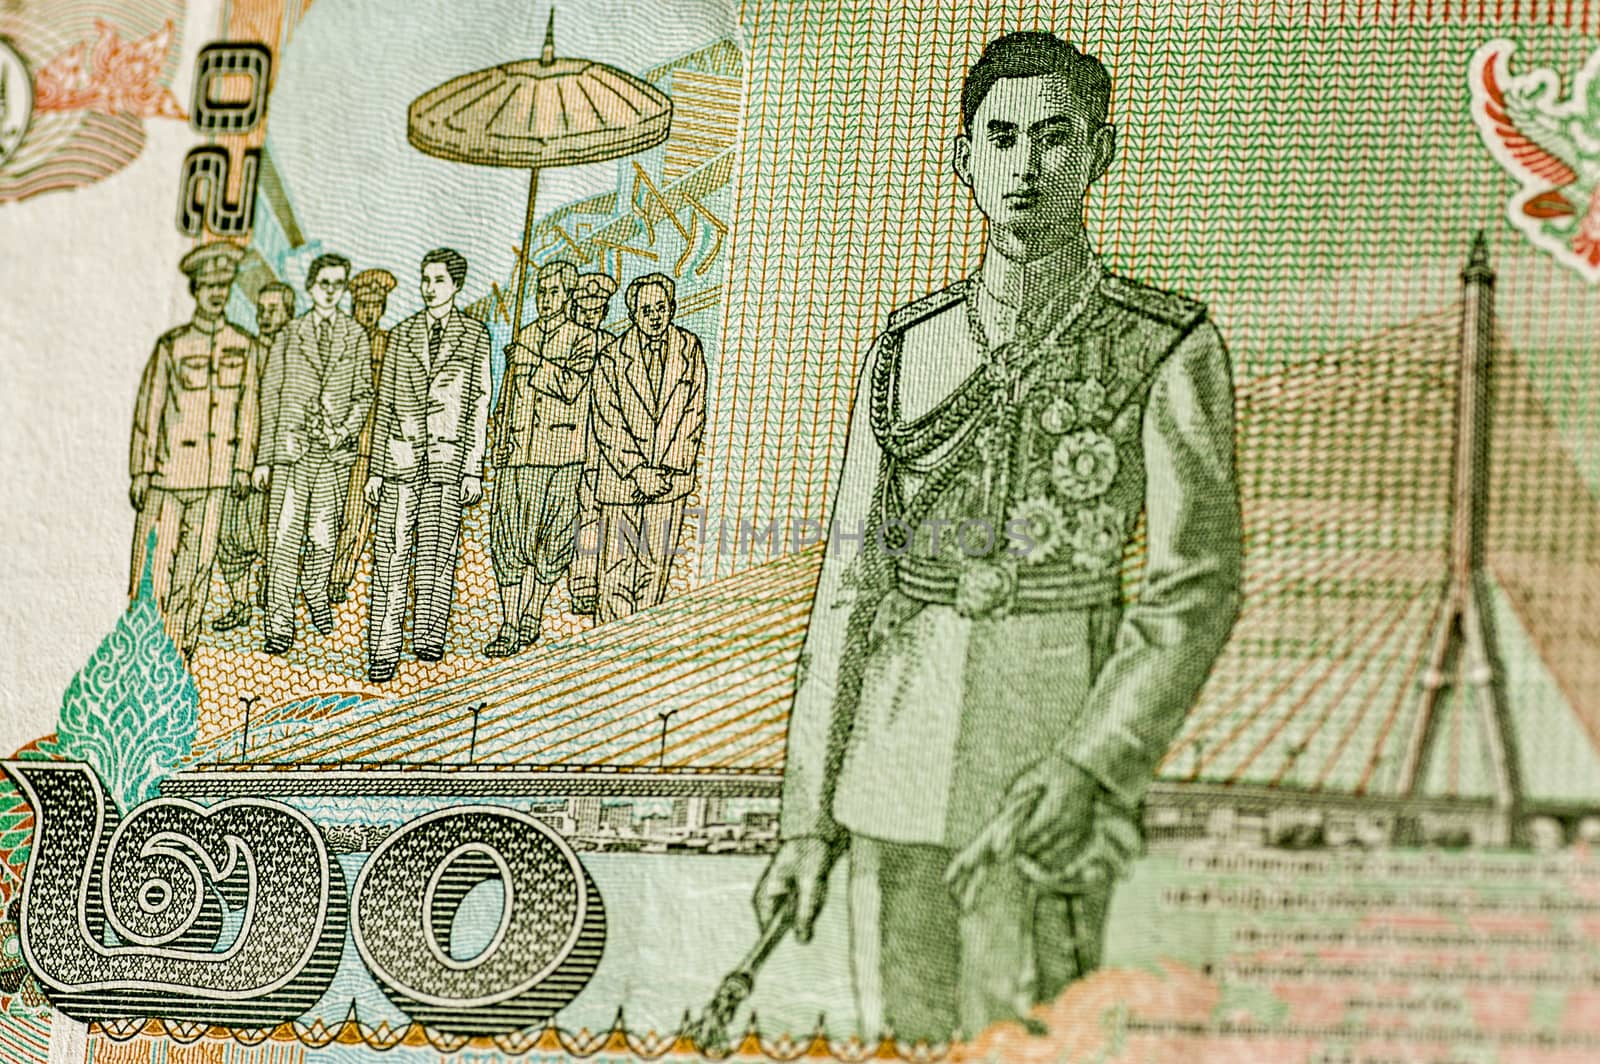 Reverse of Thailand 20 Baht banknote showing His Majesty King Ananda Mahidol, known as King Rama VIII and a modern bridge. Used banknote, shown at an angle.